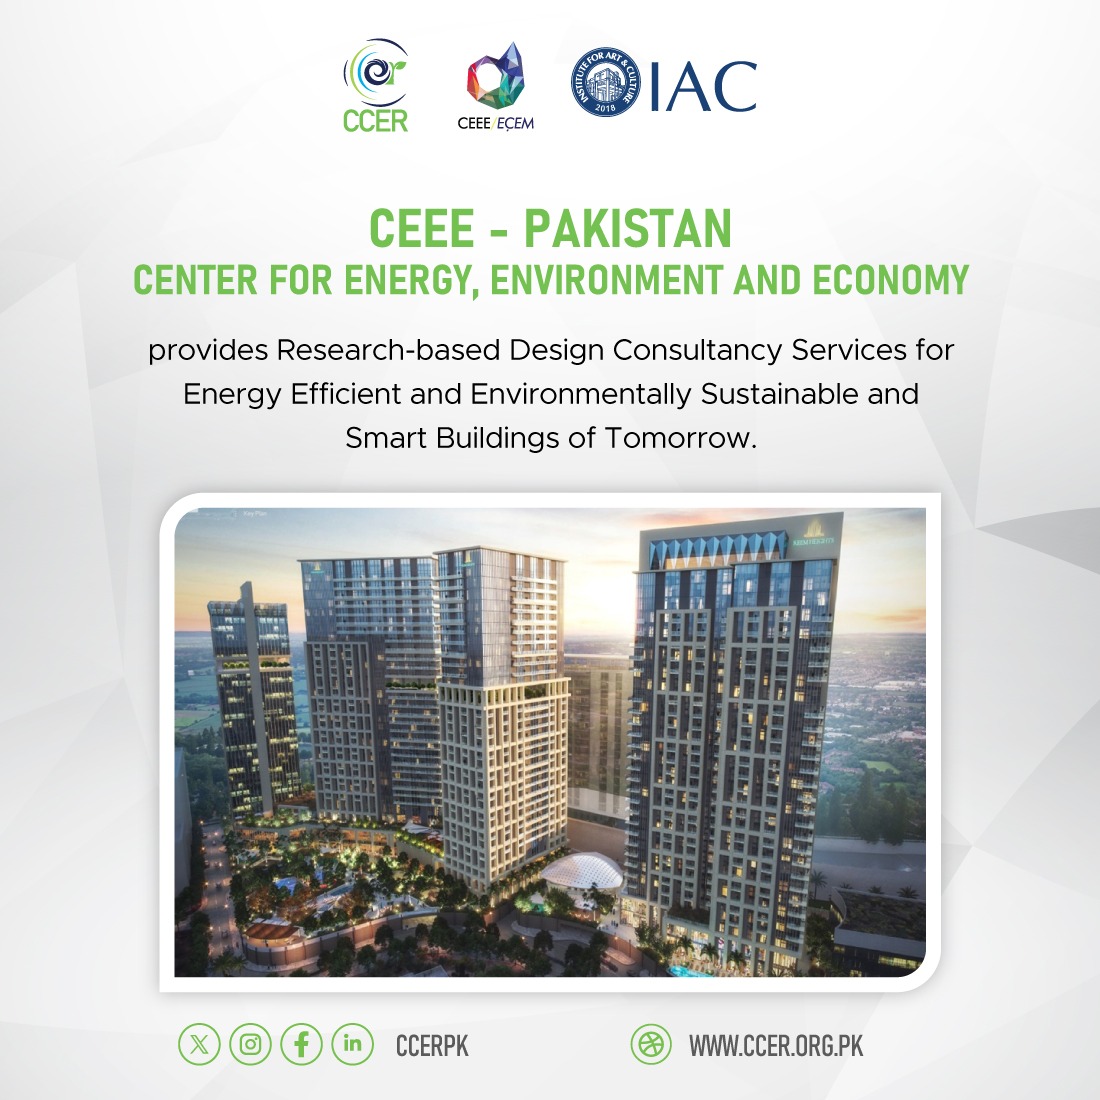 CEEE provides Research-based Design Consultancy Services for Energy Efficient and Environmentally Sustainable and Smart Buildings of Tomorrow.
ccer.org.pk

#climatecontrol #environmental #global #sustainable #development #consultancy #design #research l 
#iacofficials